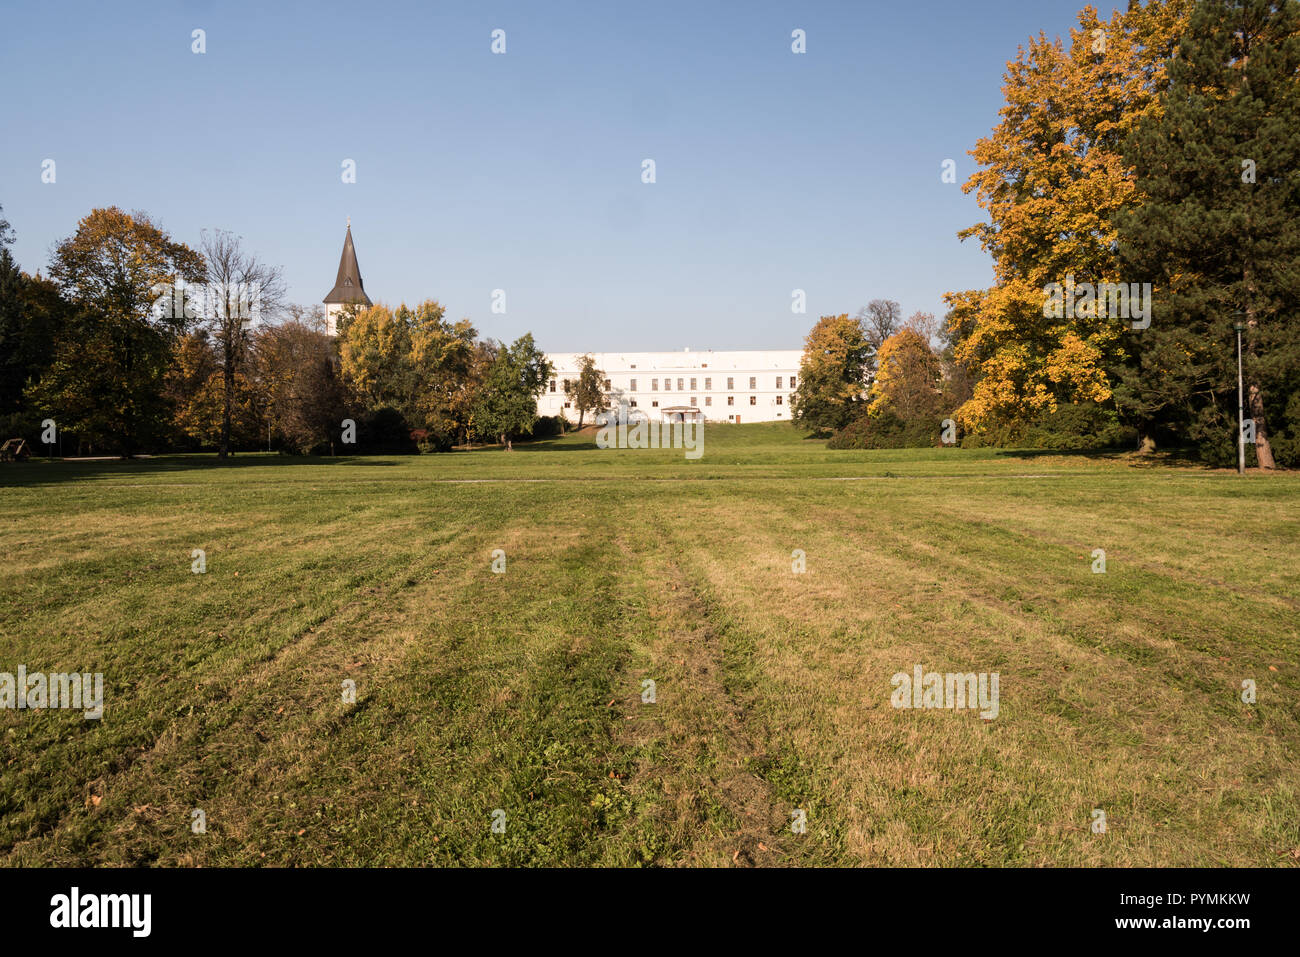 Park Bozeny Nemcove wth grass and colorful trees, chateau Frystat and Kostel Povyseni sv. Krize church on the background in Karvina city during autumn Stock Photo